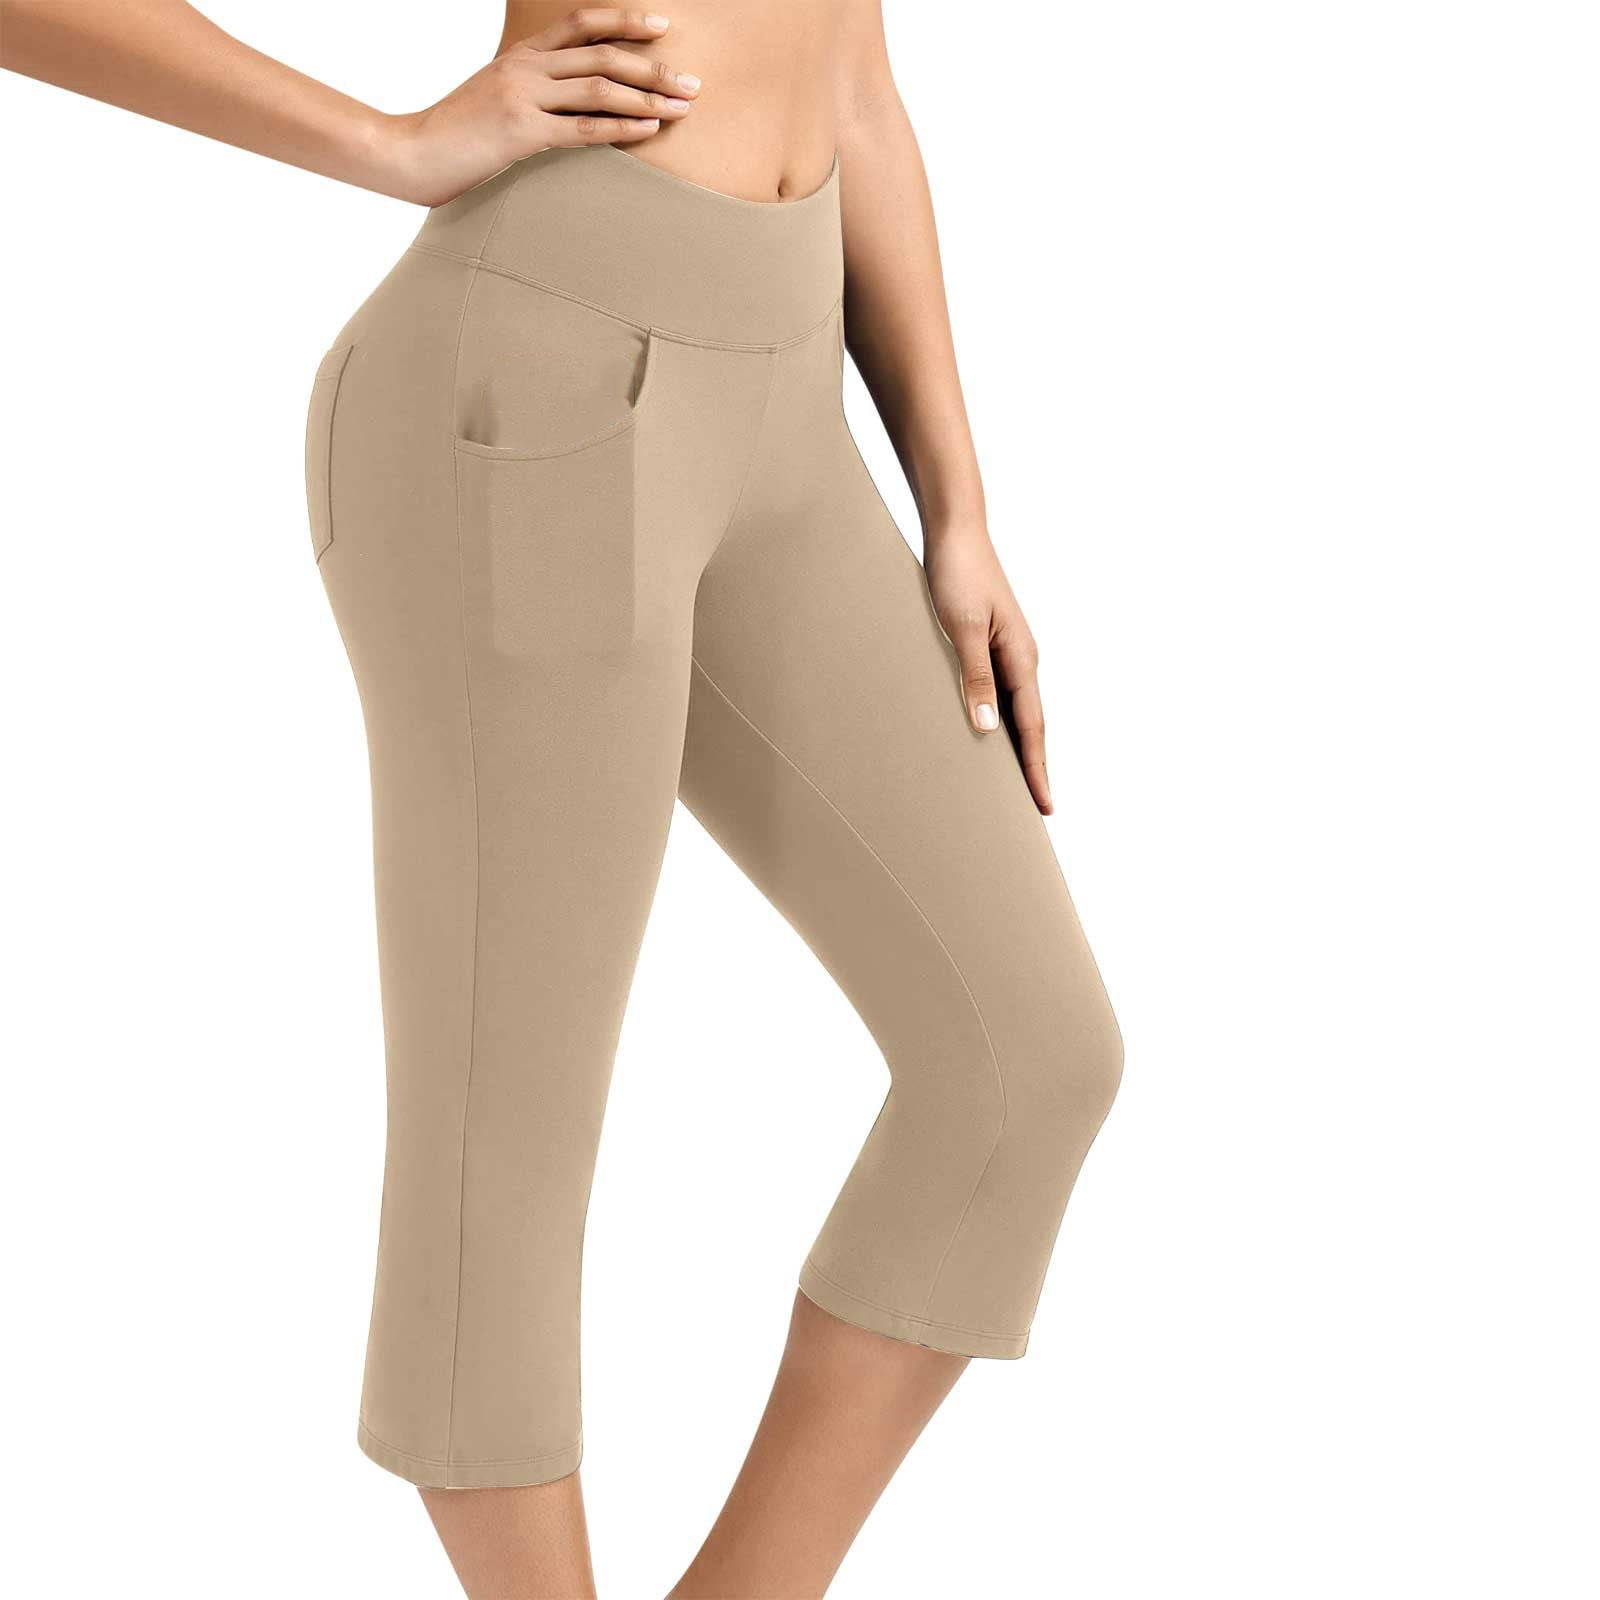 NILLLY Gym Leggings High Waist Solid Color Pocket Trousers Sports